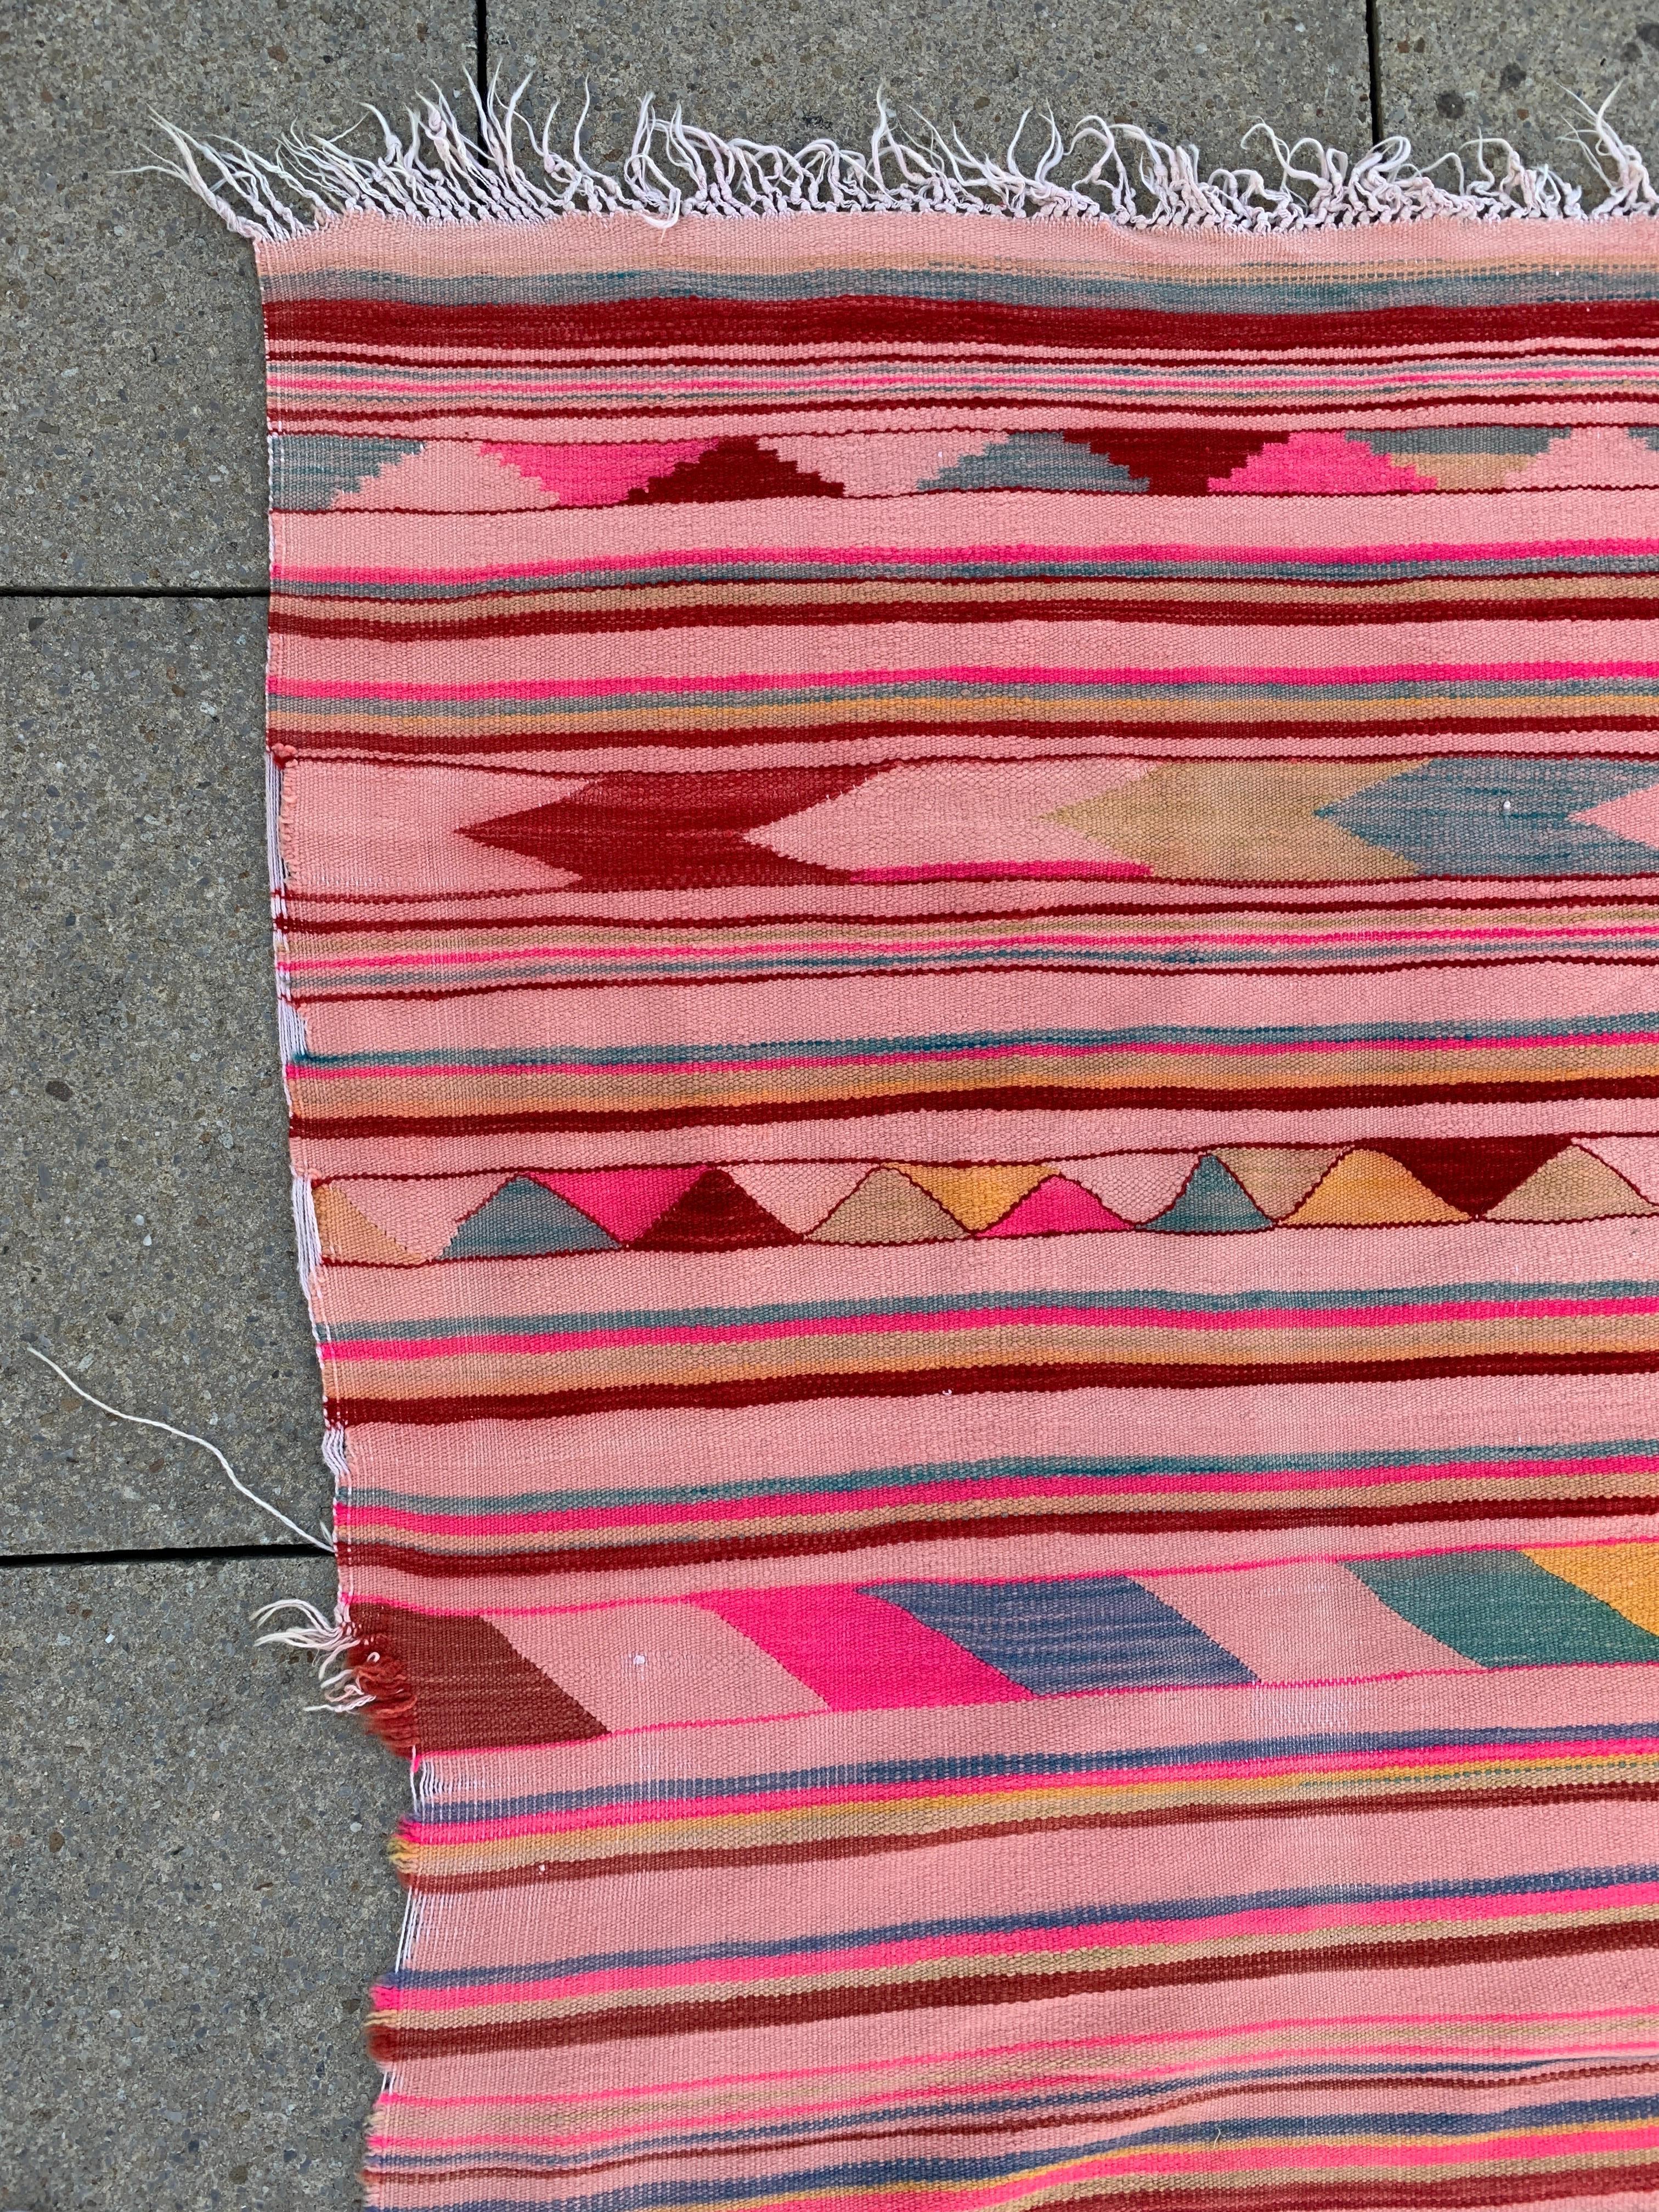 Mid-20th Century Large 1960s Pink Stripped Rug Handmade Vintage Algerian Geometrical 162x369cm For Sale